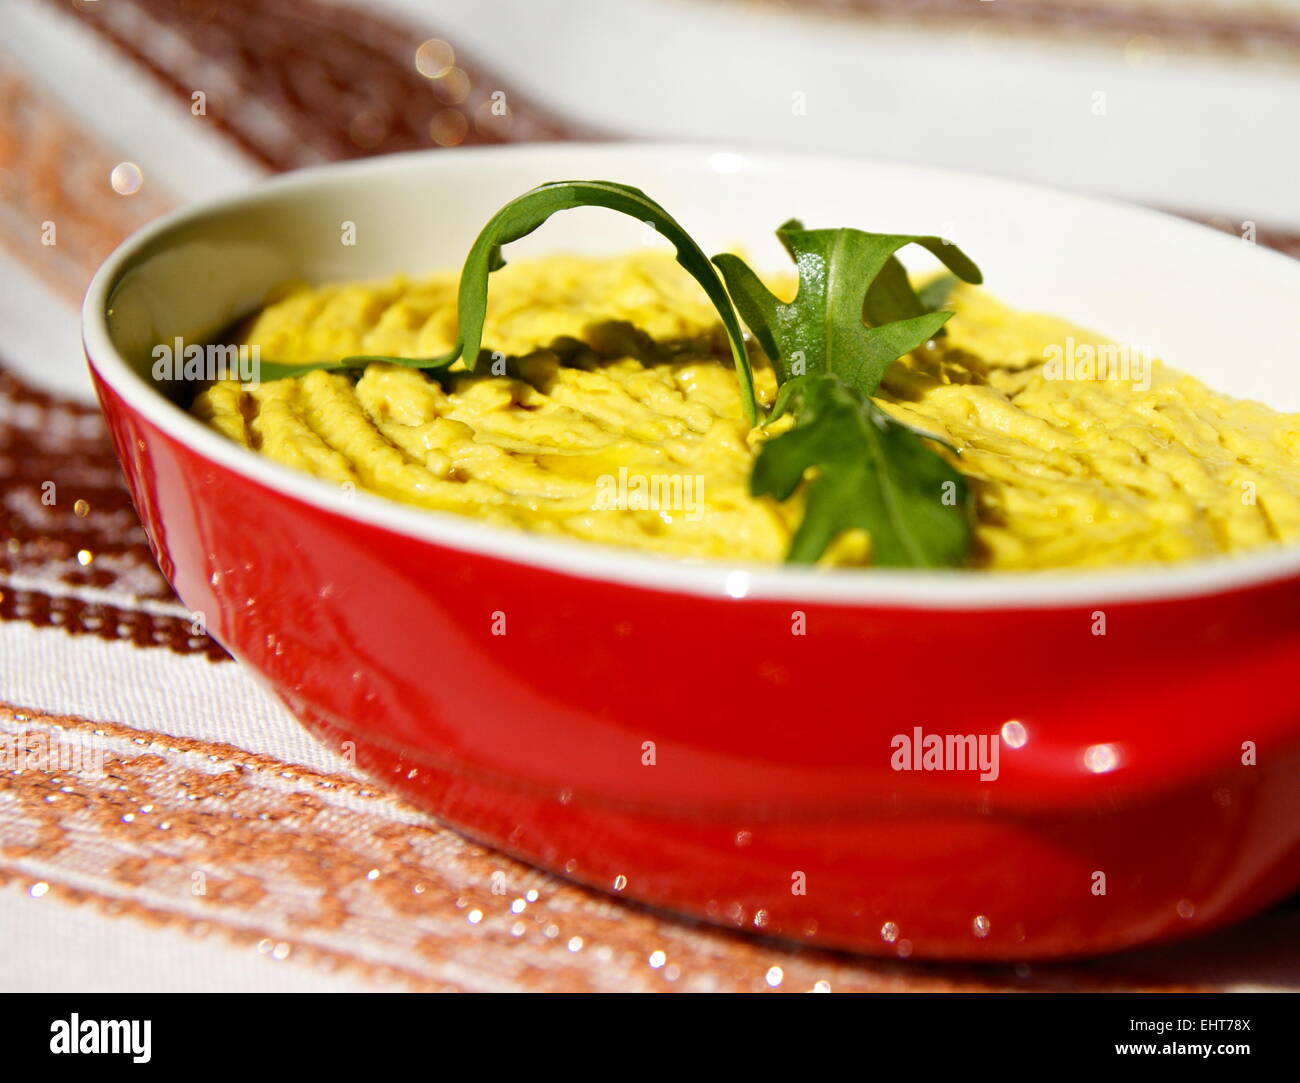 Humus paste with olive oil and chili, decorated with rucola Stock Photo